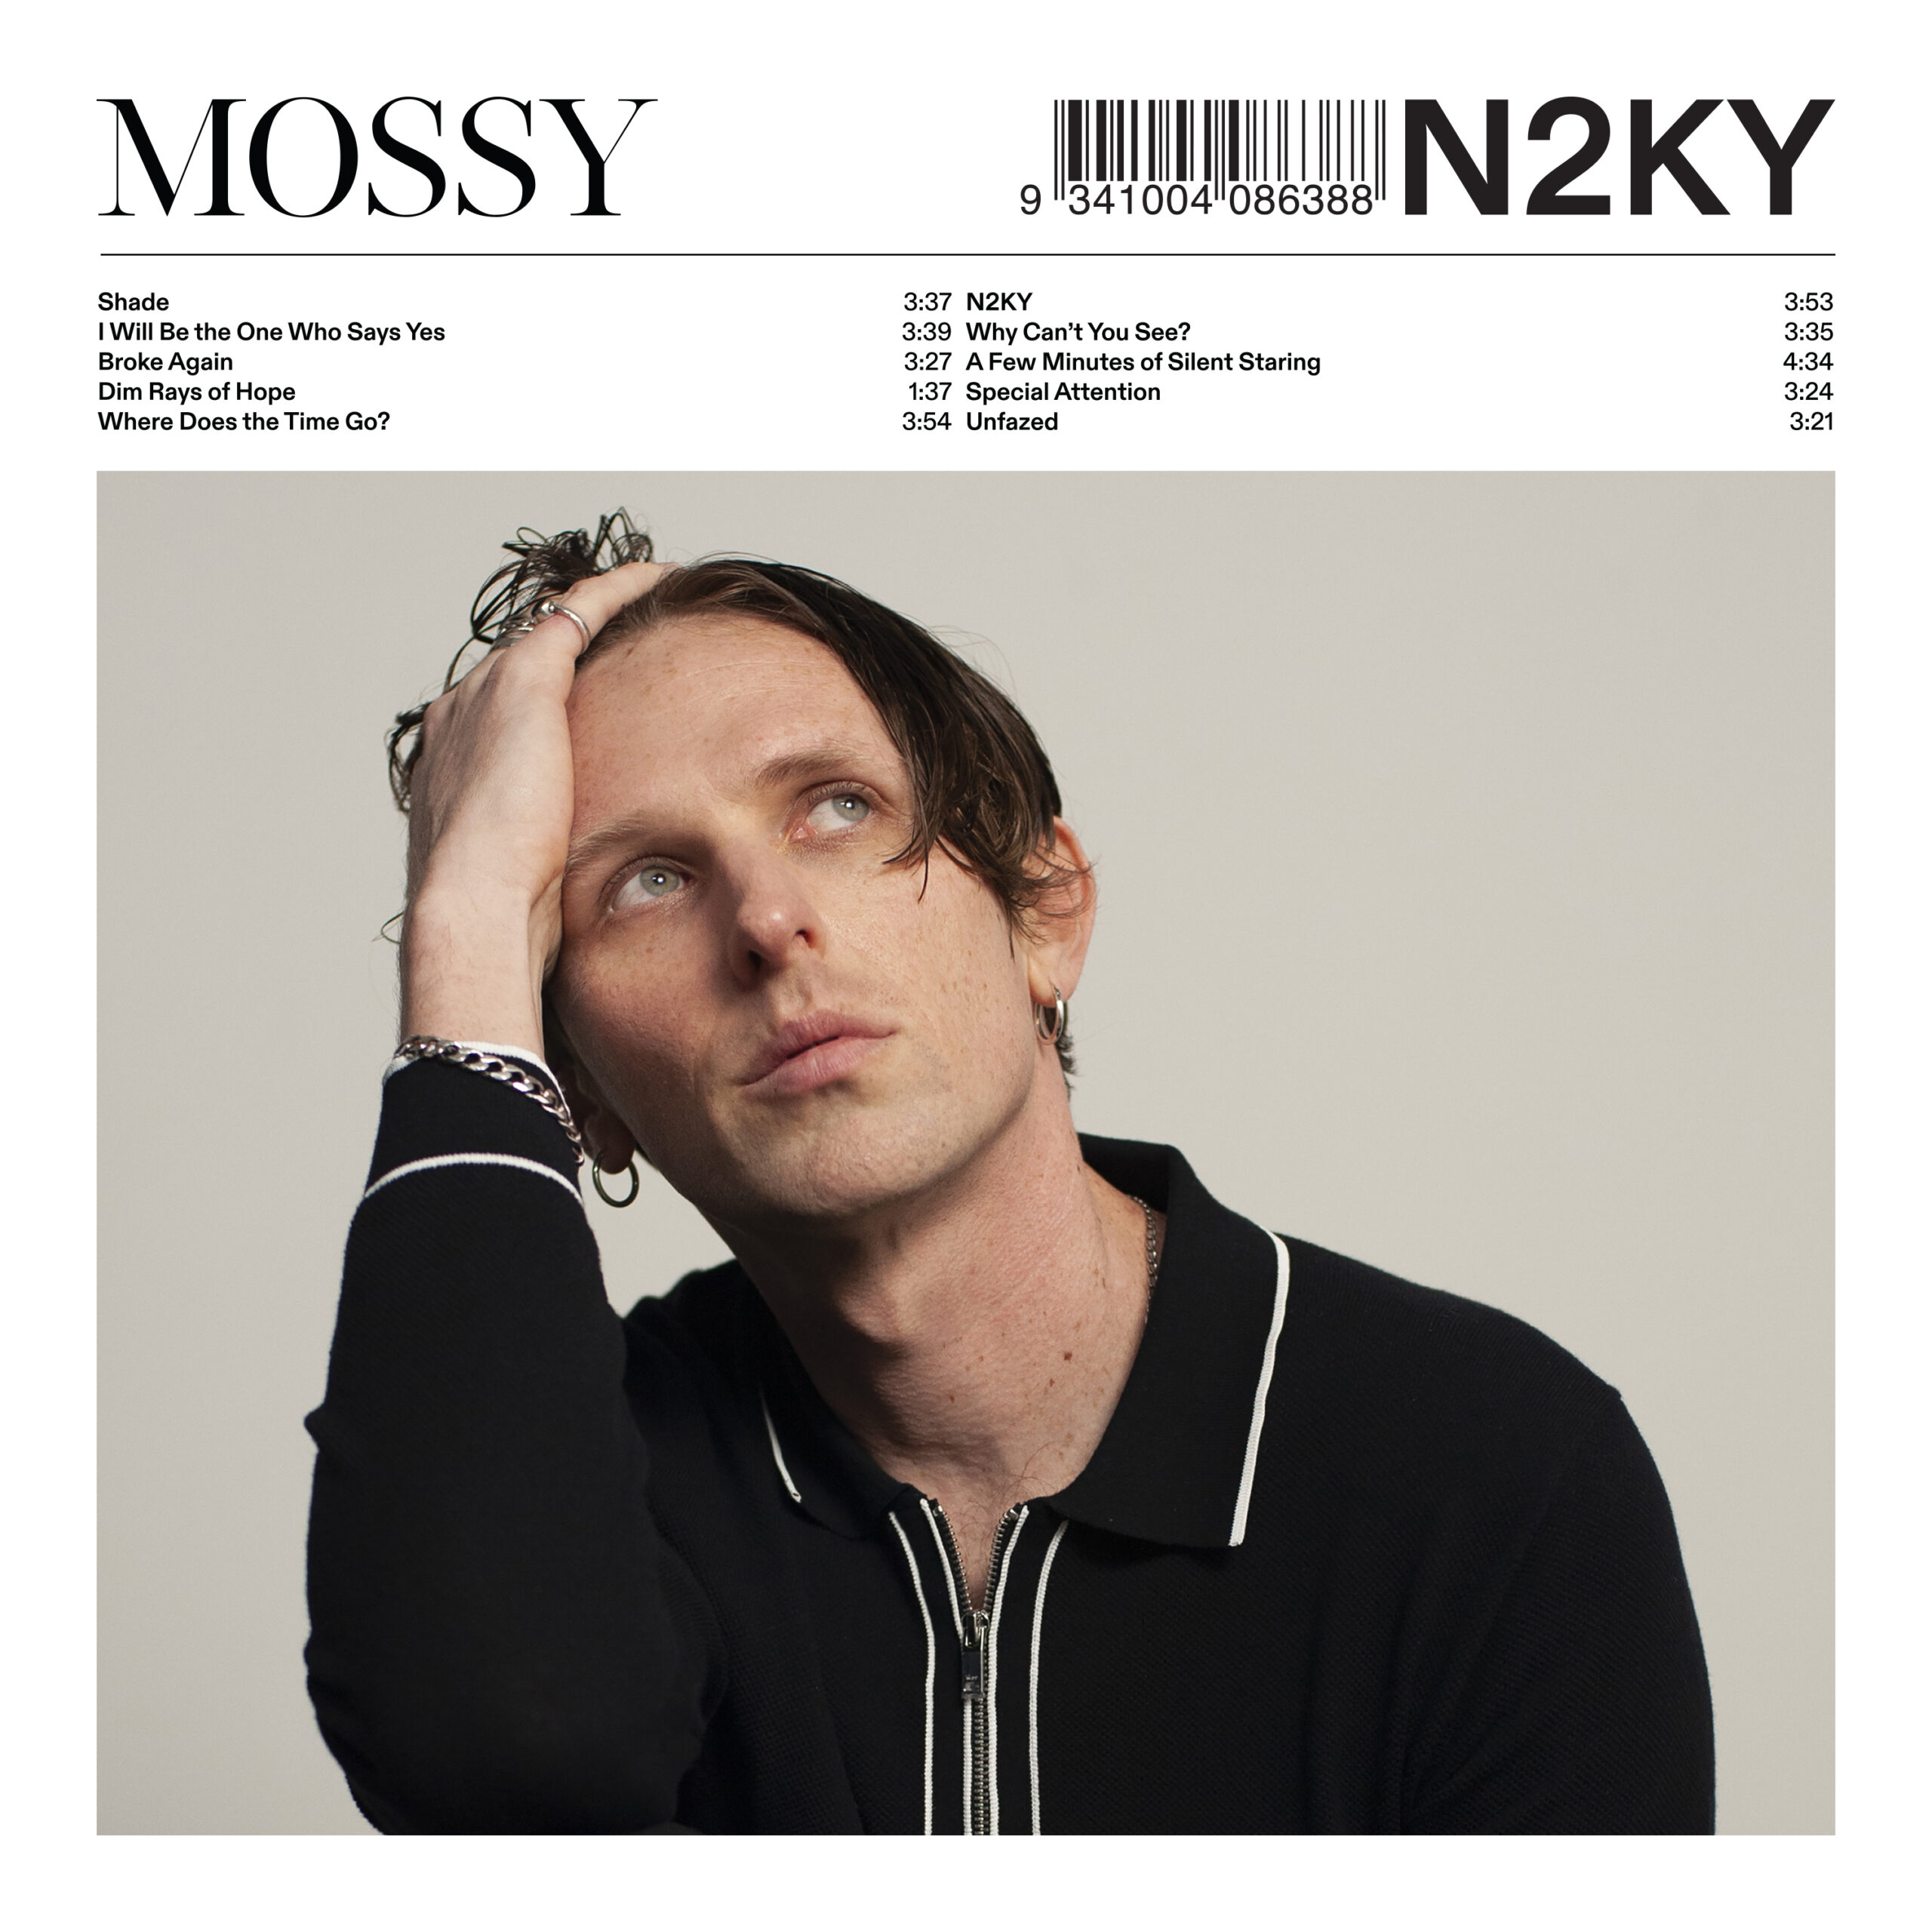 MOSSY SHARES BANOFFEE RE-WORK OF NEW SINGLE ‘UNFAZED’ DEBUT ALBUM N2KY OUT FRIDAY 18 MARCH